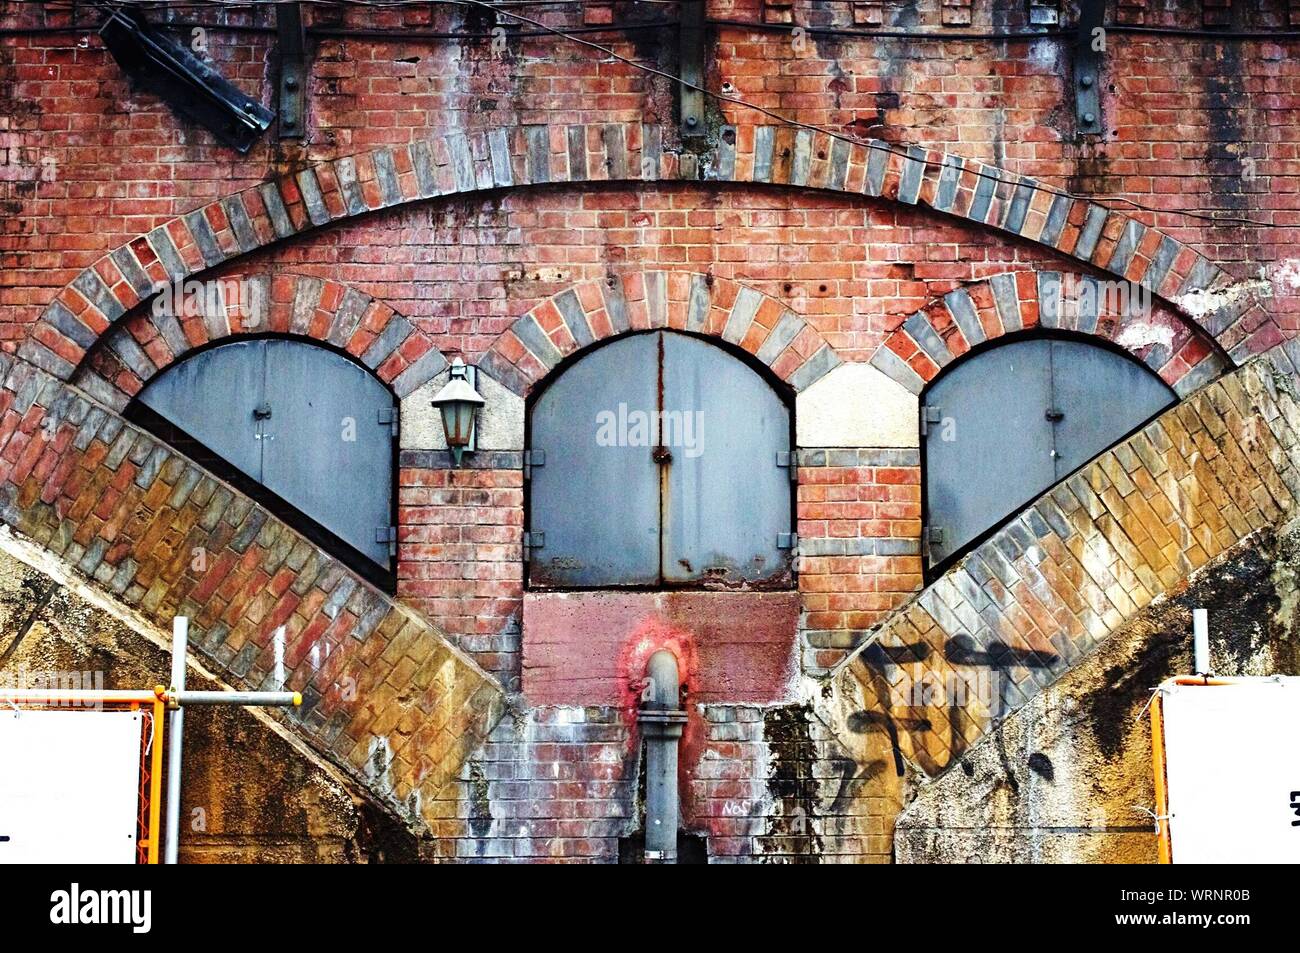 Arched Windows On Brick Wall Stock Photo